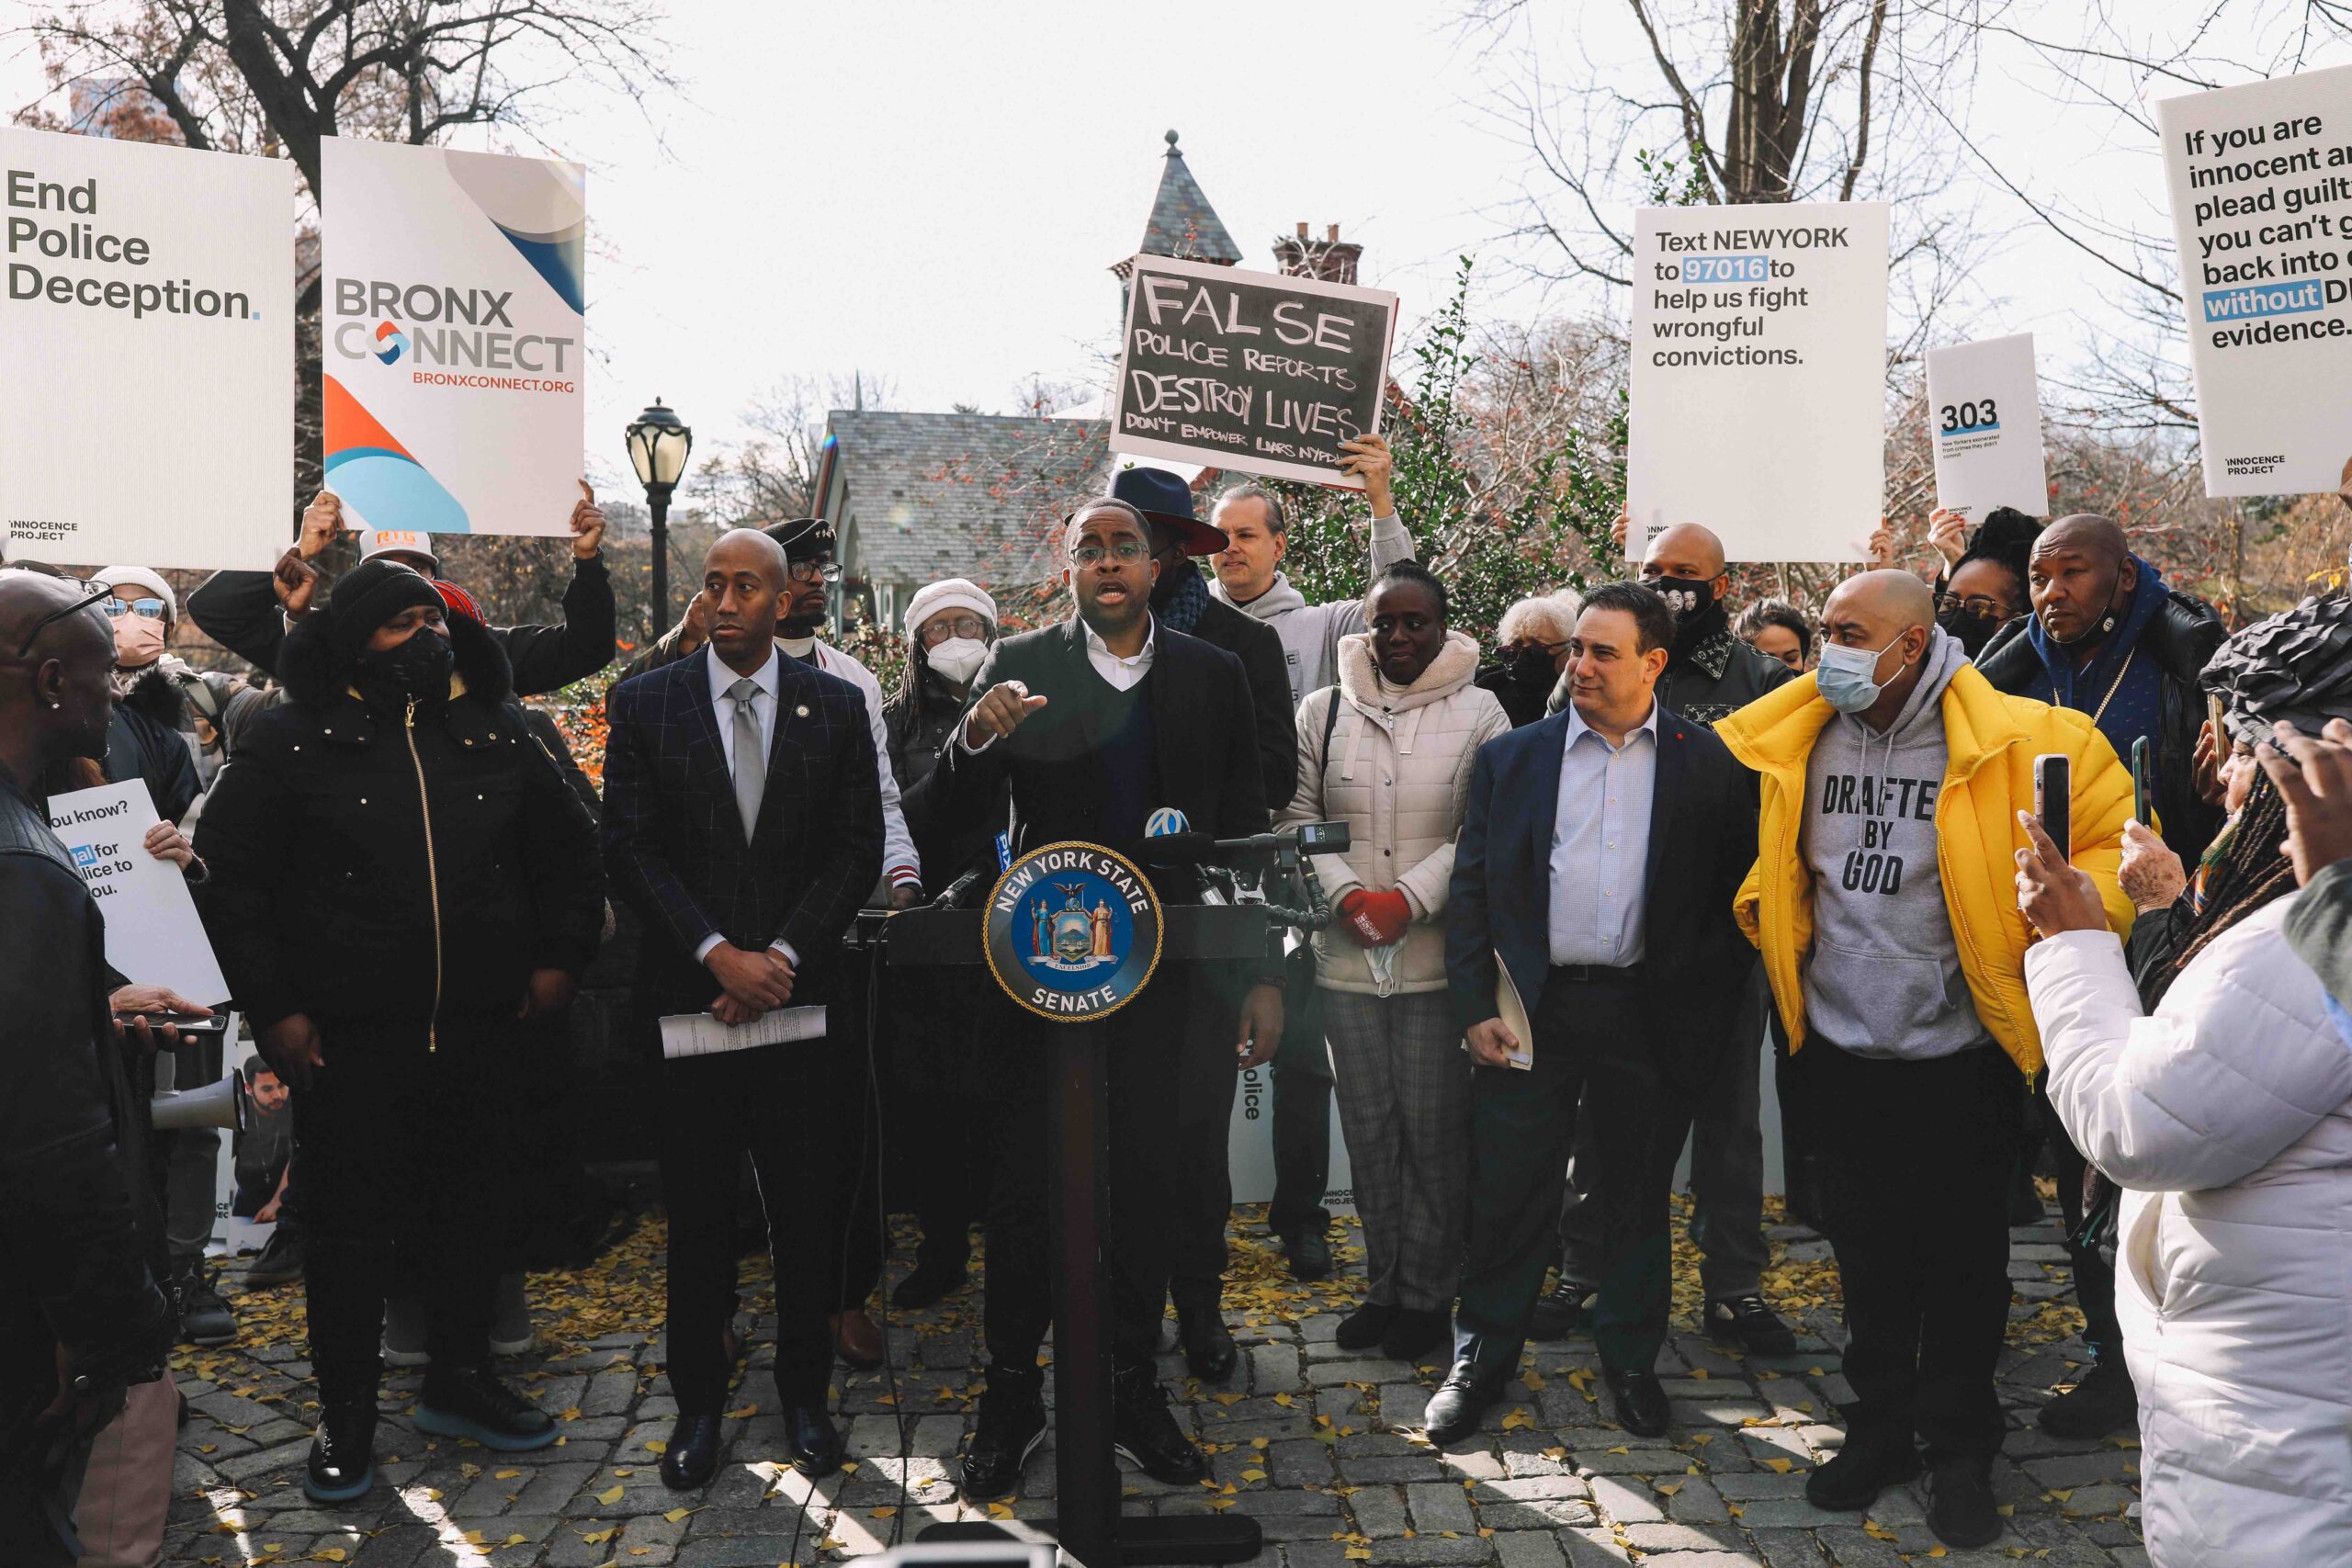 From left to right: Assemblyman Clyde Vanel, Sen. Myrie Zellnor, Senator-Elect Cordell Cleare, Marty Tankleff, and Raymond Santana introducing a criminal justice package in New York on Dec. 14, 2021 in Central Park. (Image: Elijah Craig/Innocence Project)